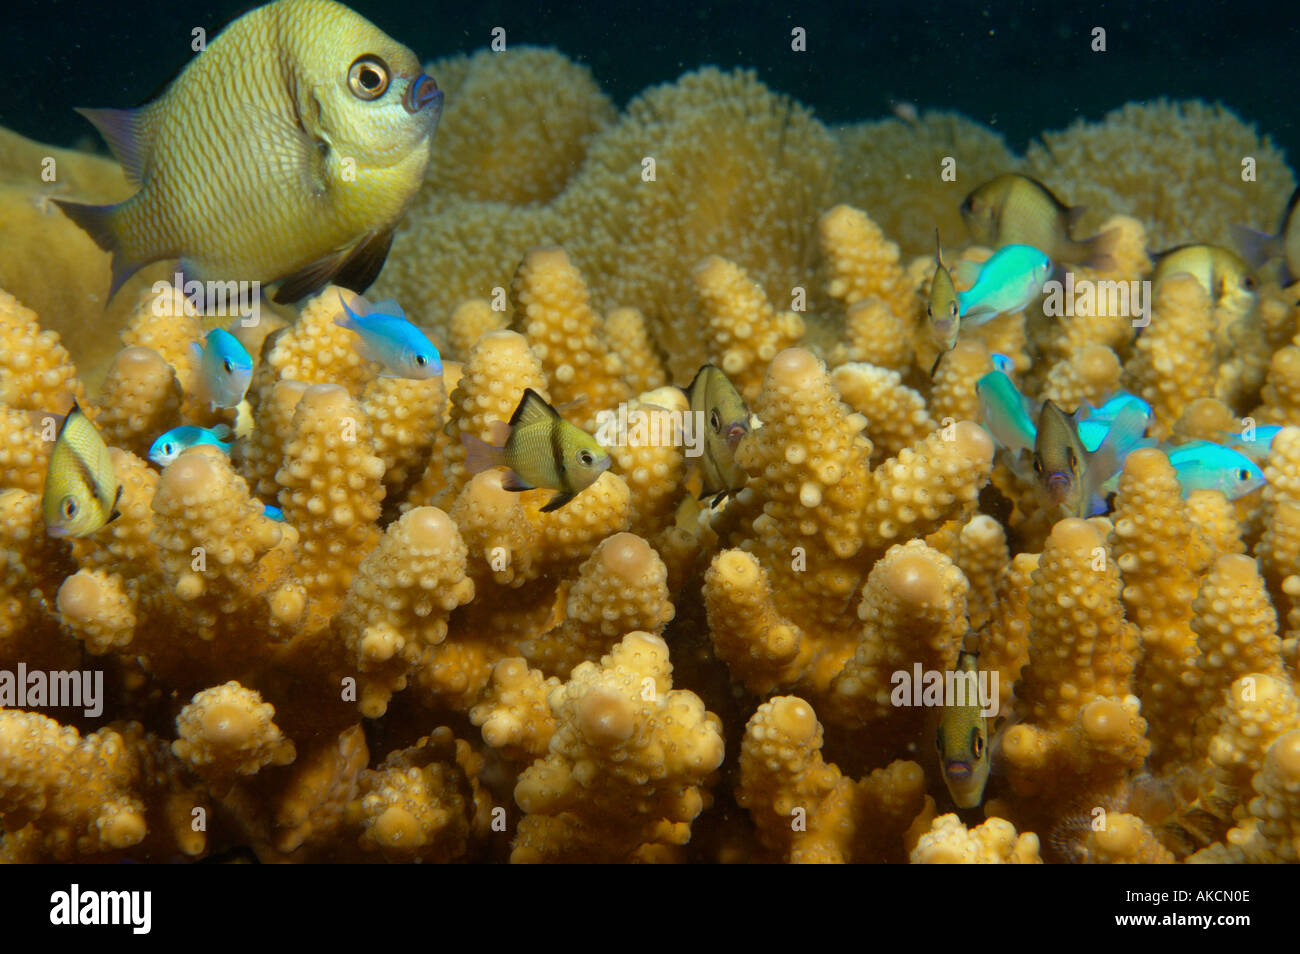 Damsel fishes sheltering in hard coral Papua New Guinea Stock Photo